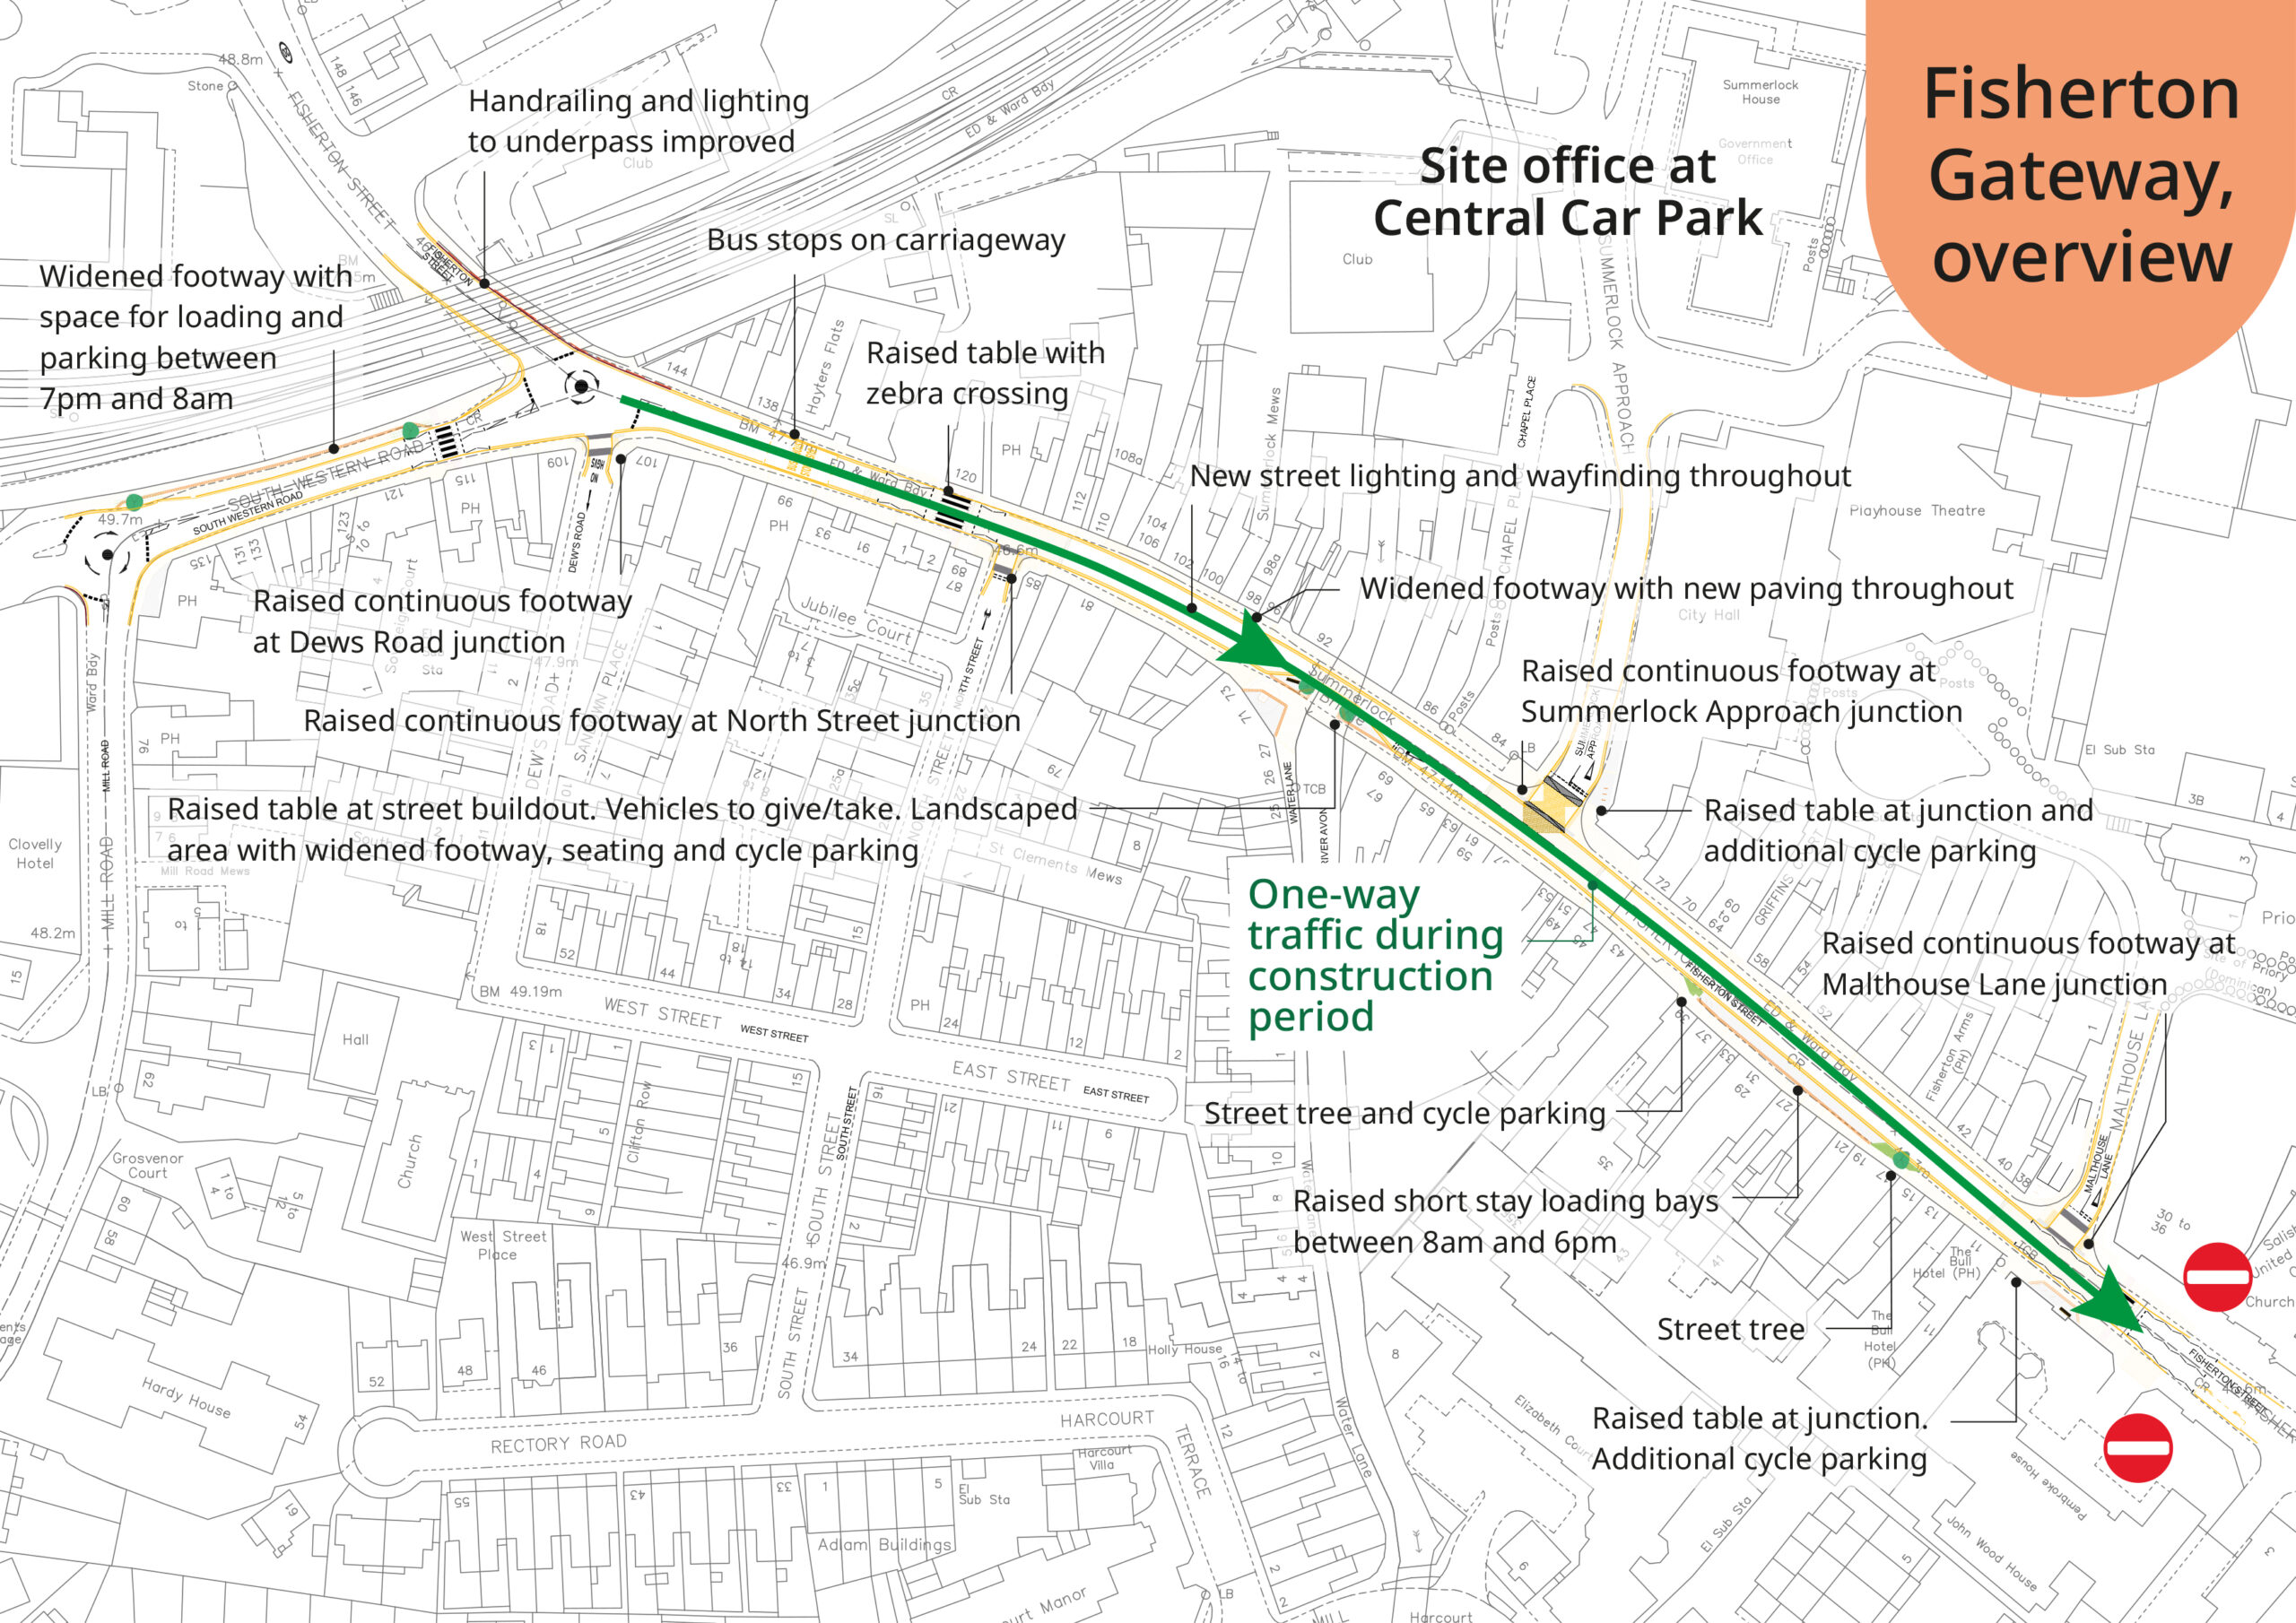 An overview of works planned in the Fisherton Gateway. Picture: Wiltshire Council